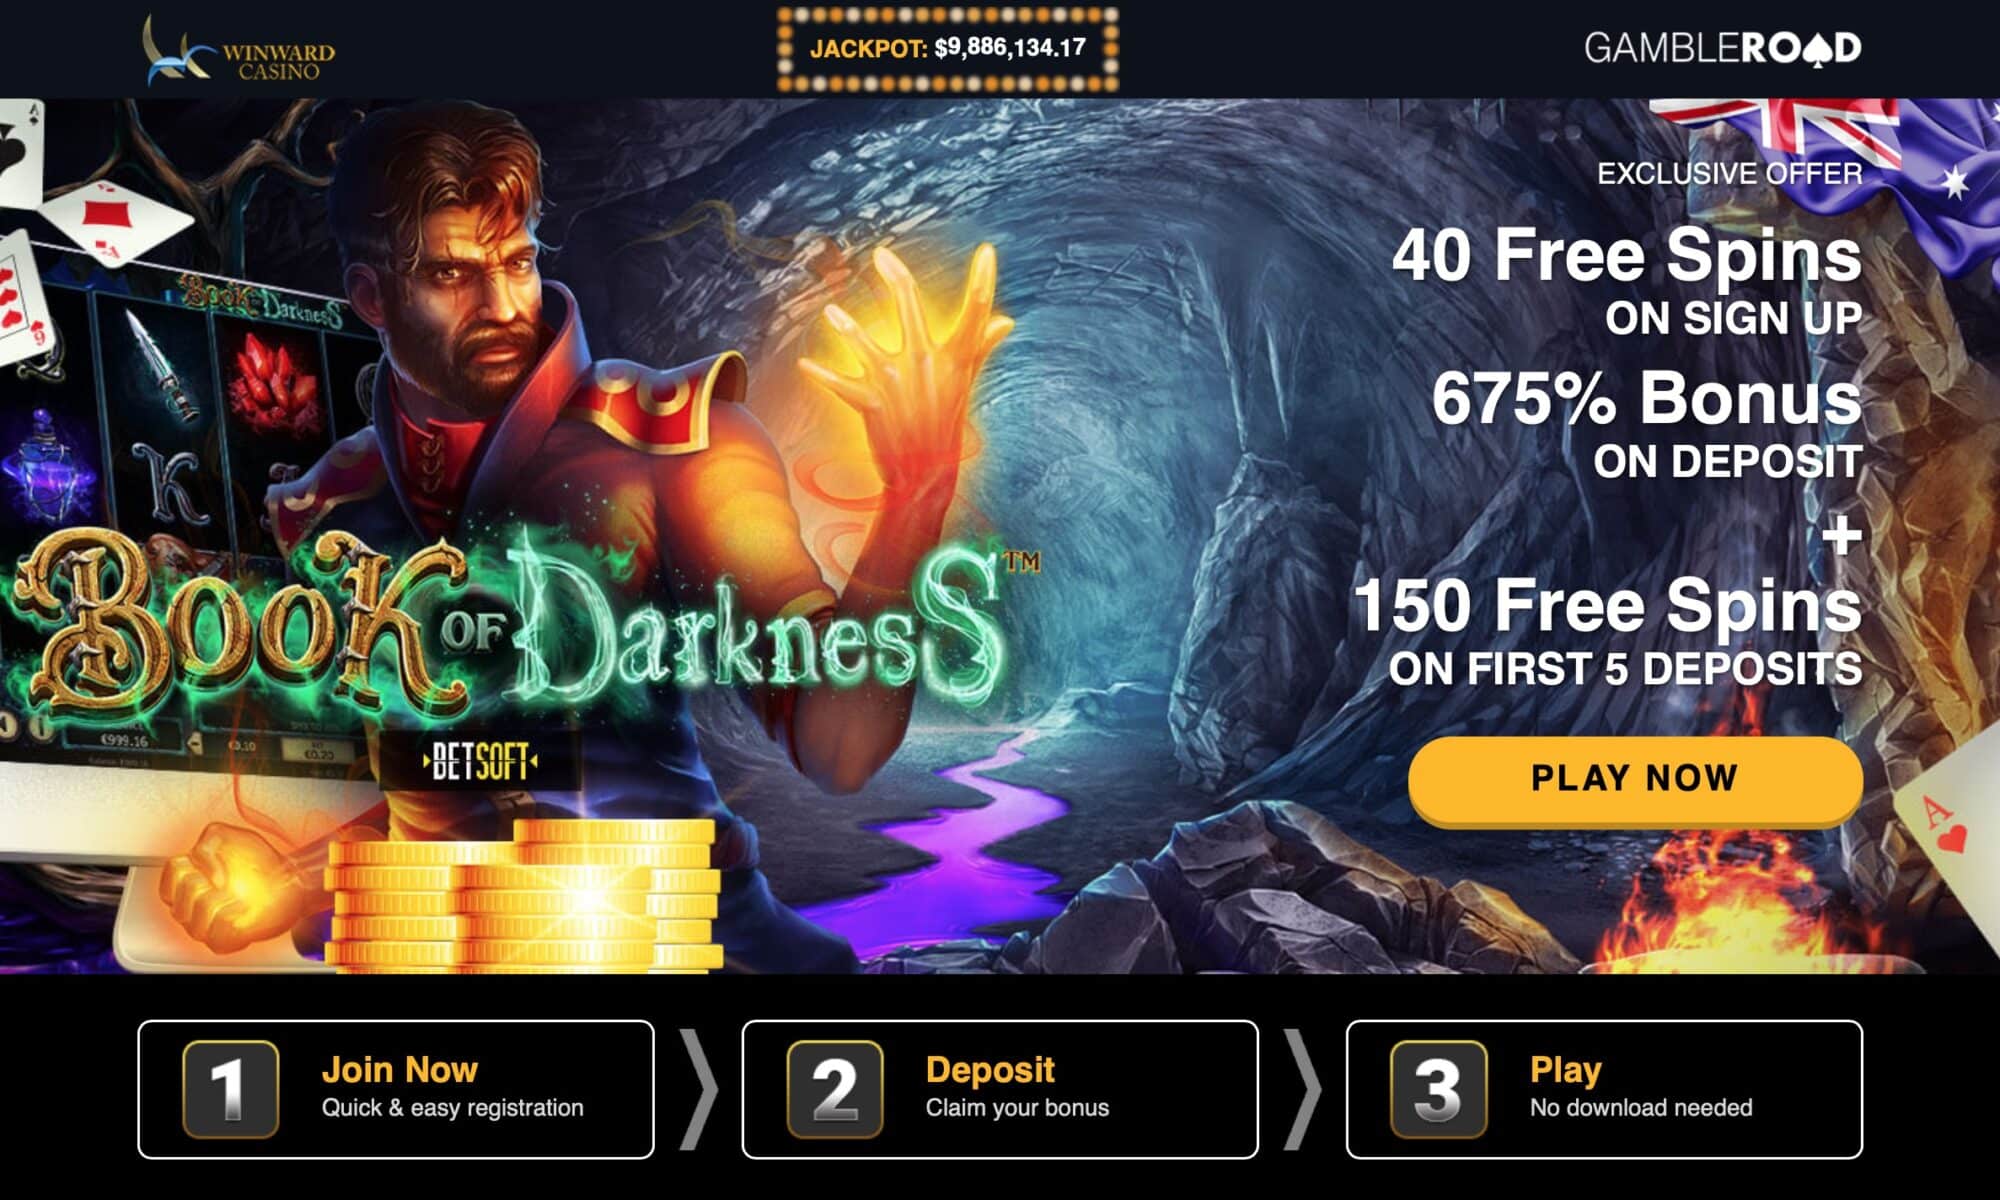 Winward Casino - get 40 free spins on sign up